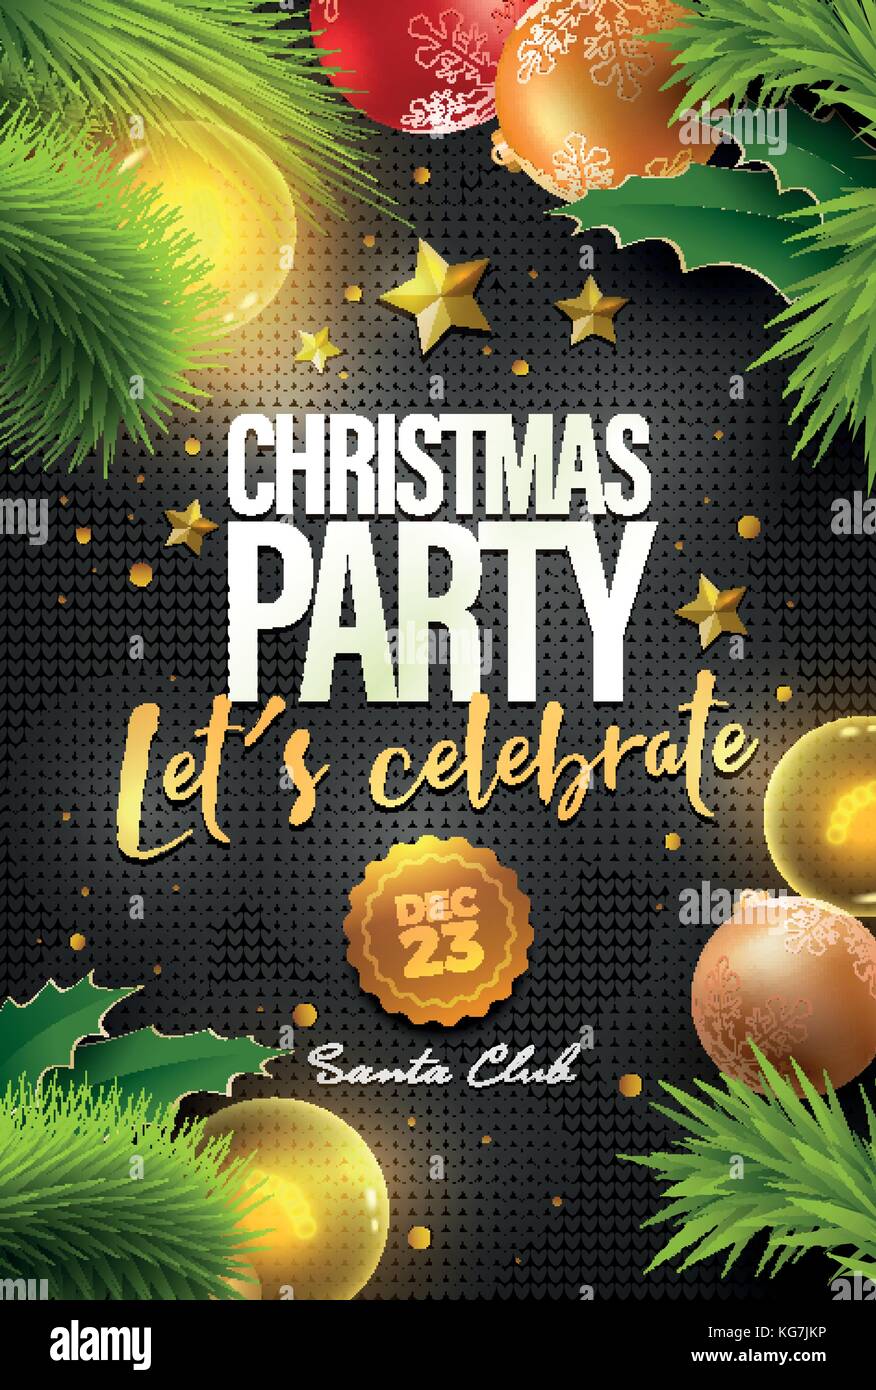 Merry Christmas Party Poster Design Template. Elements are layered separately in vector file. Global colors. Easy editable. Stock Vector